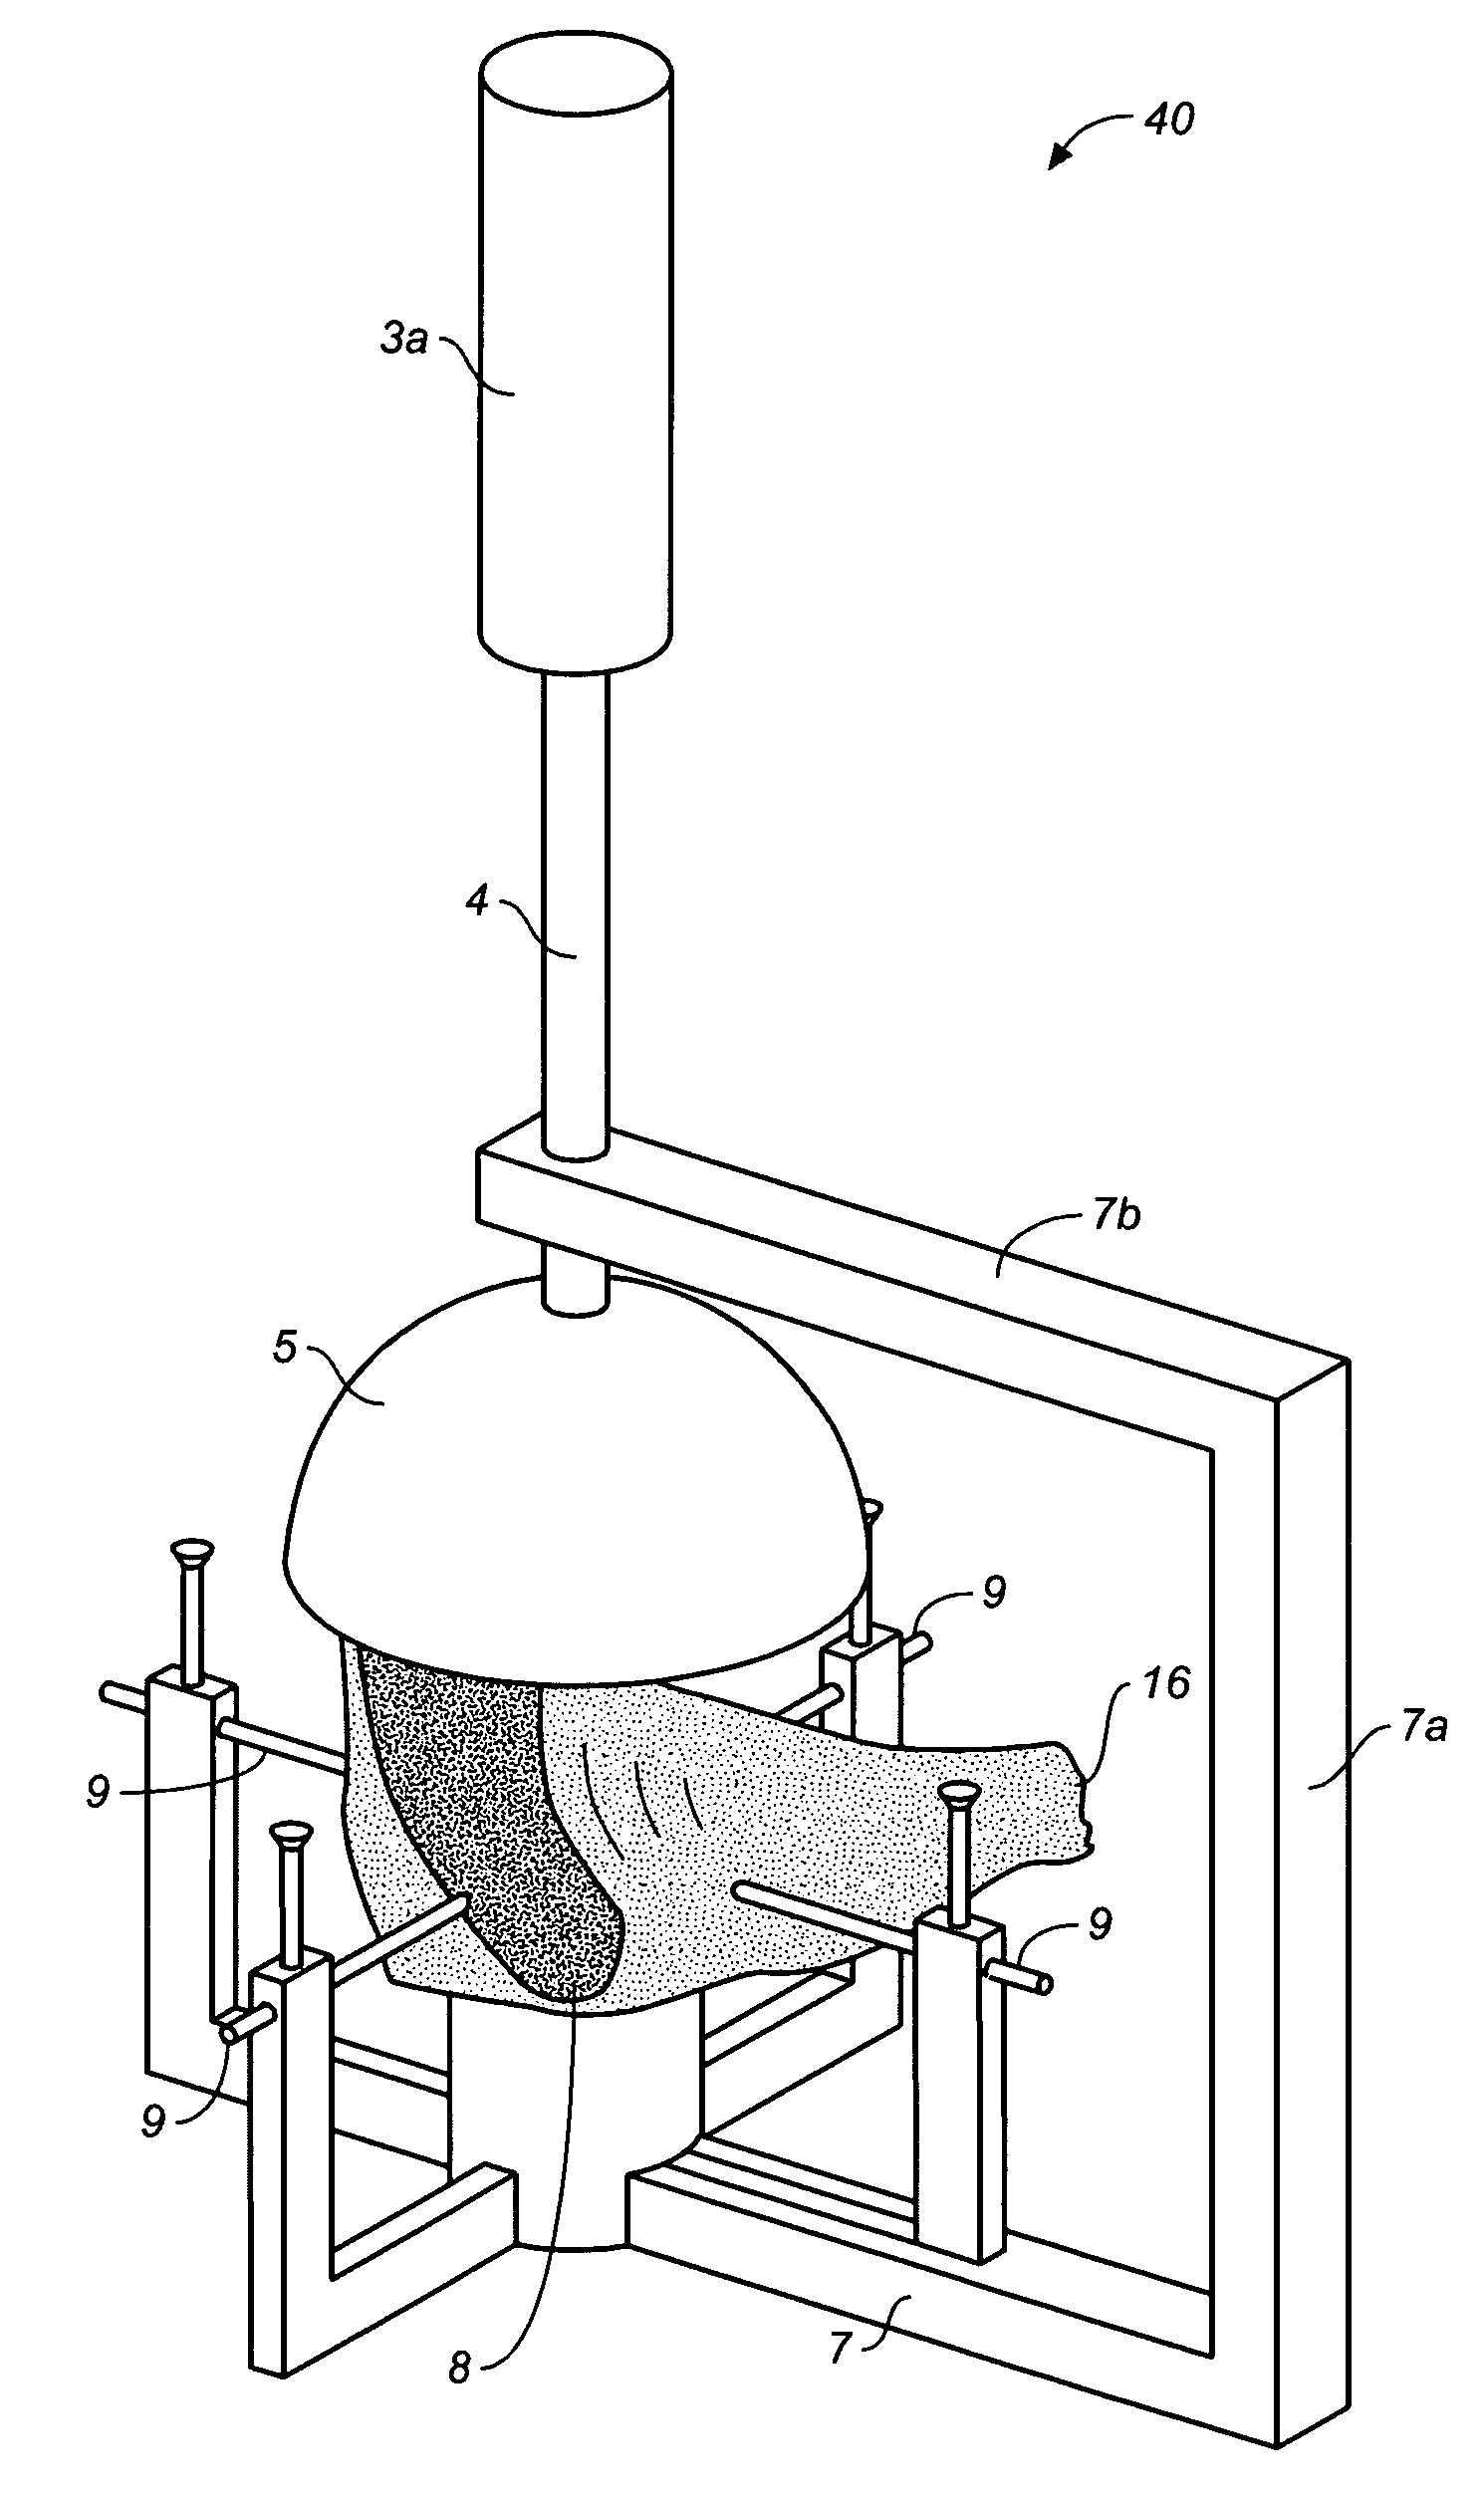 Device and method for allograft total hip arthroplasty